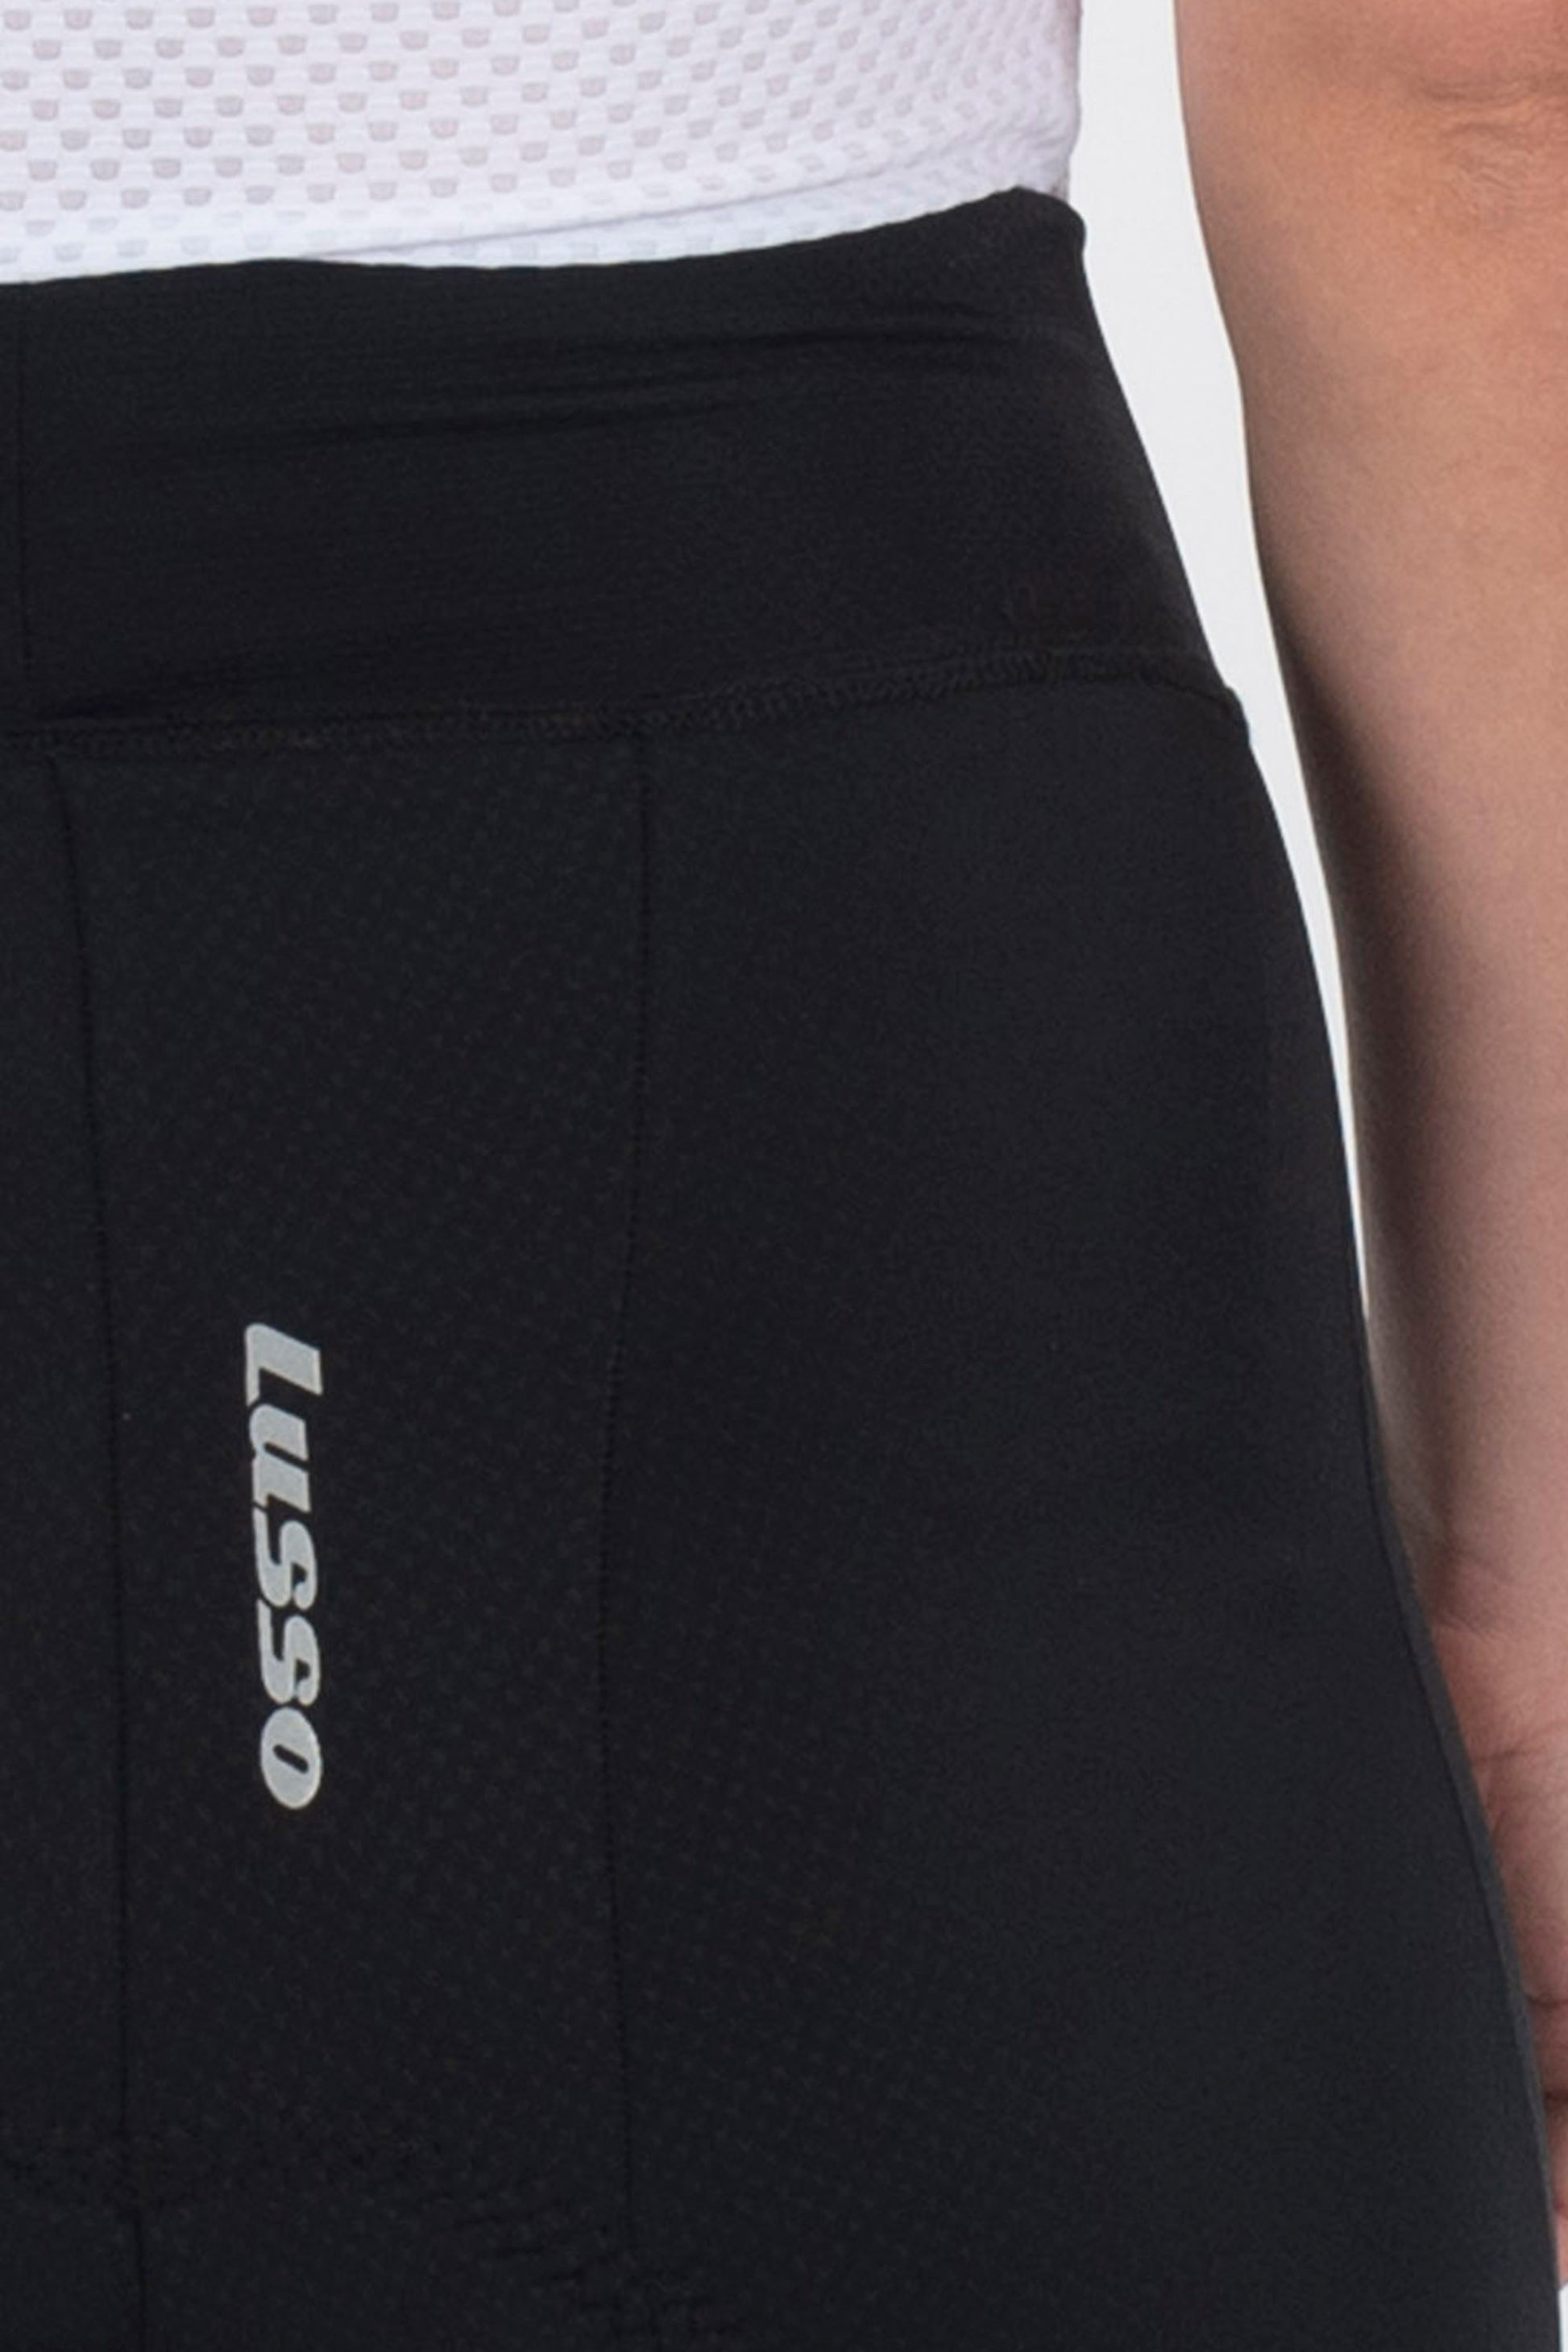 Women's Cooltech Shorts - Lusso Cycle Wear